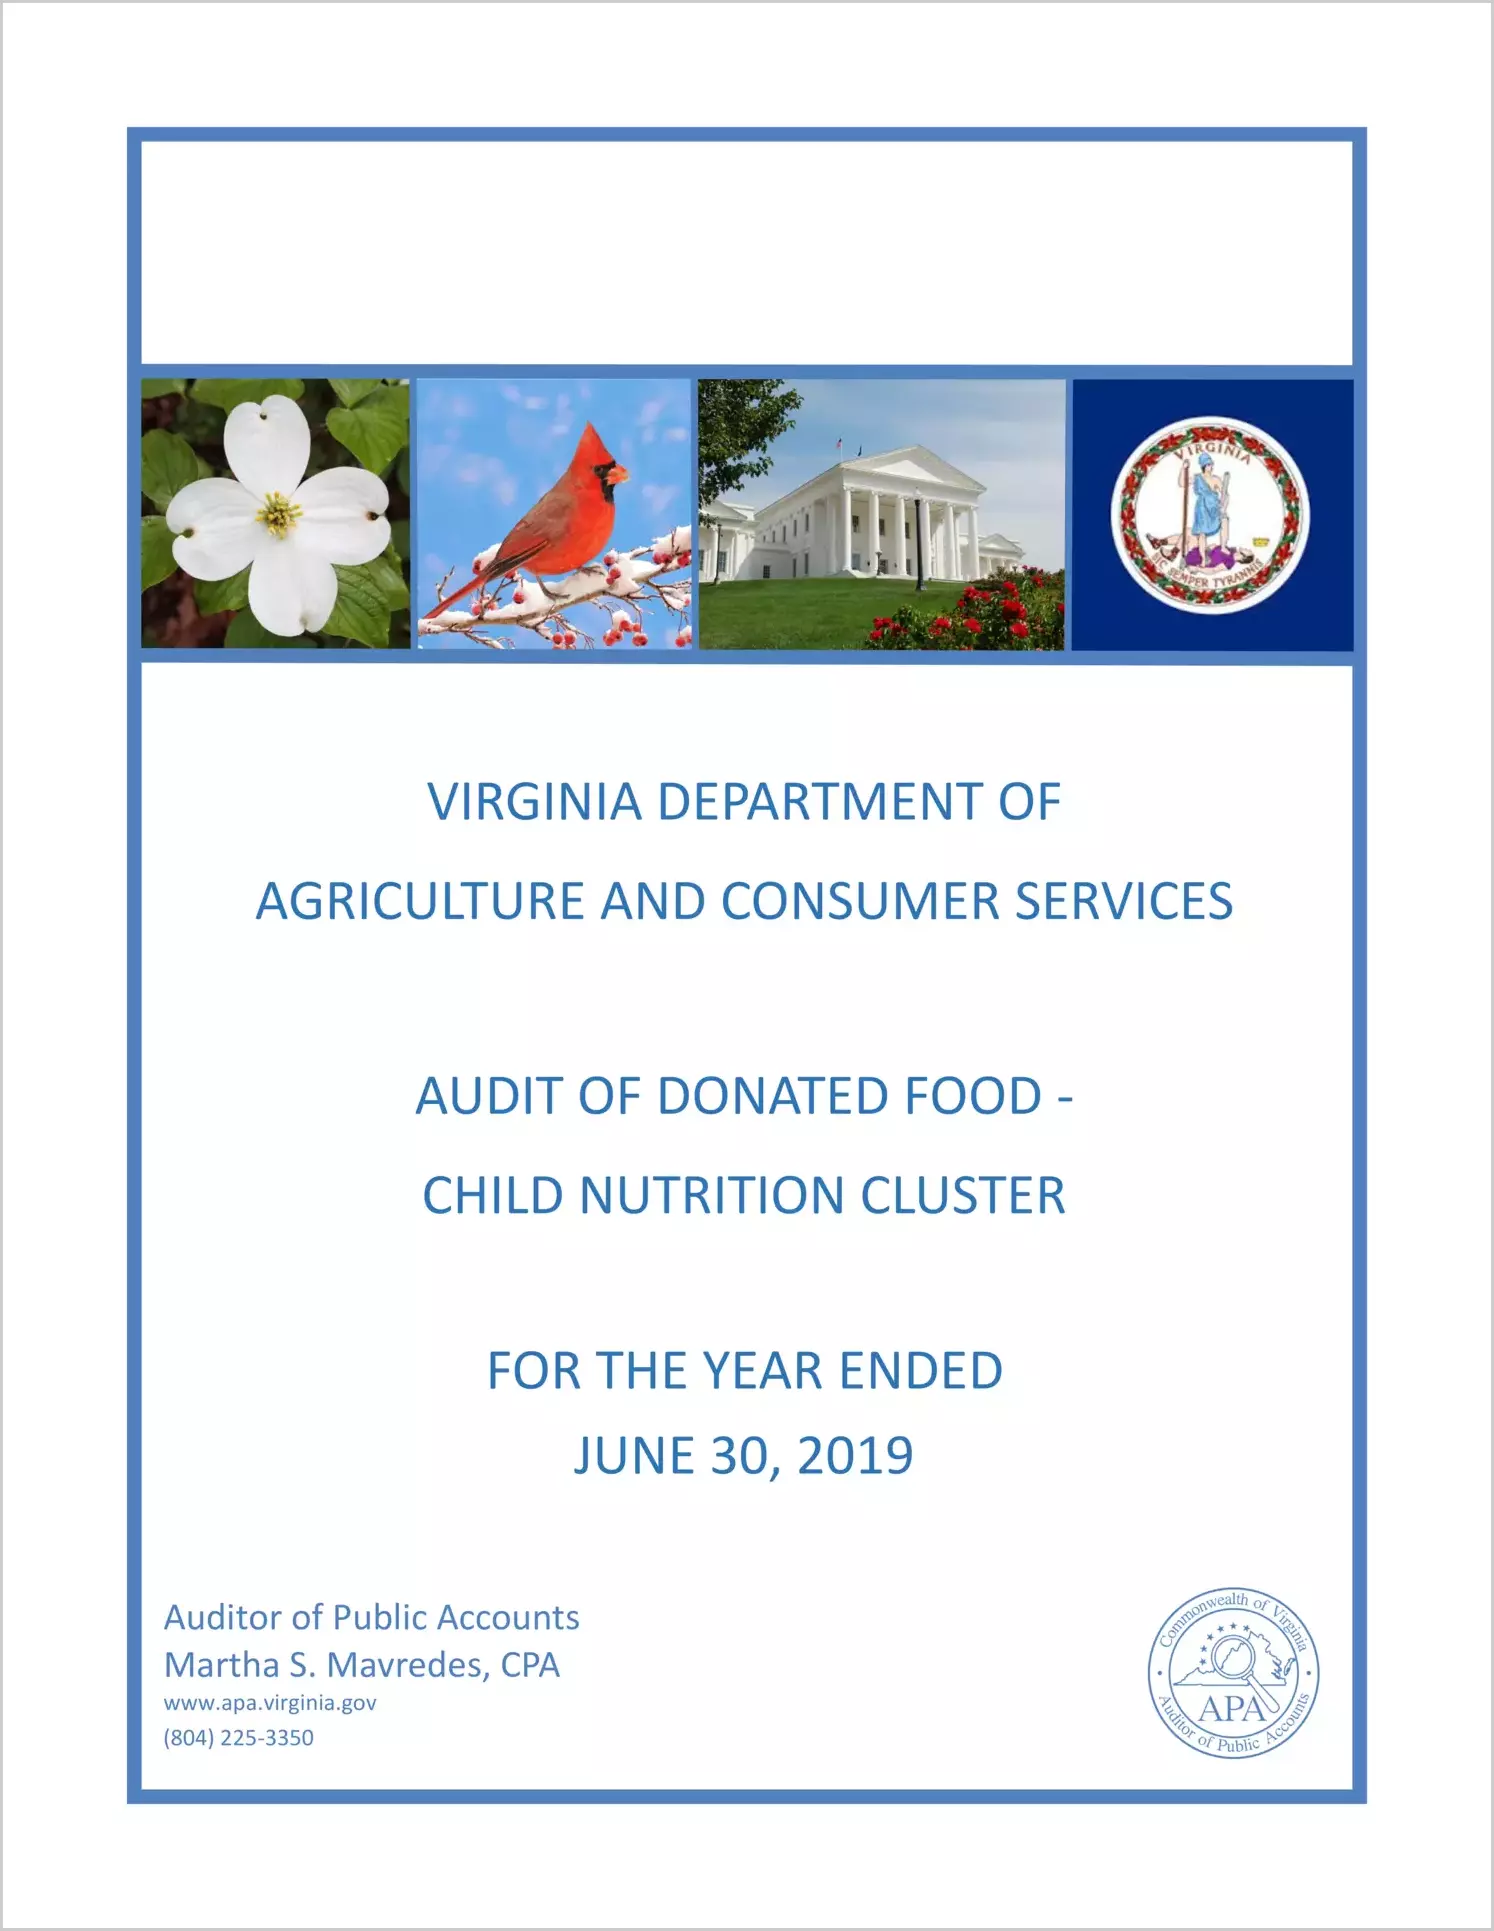 Virginia Department of Agriculture and Consumer Services Donated Food - Child Nutrition Cluster for the year ended June 30, 2019